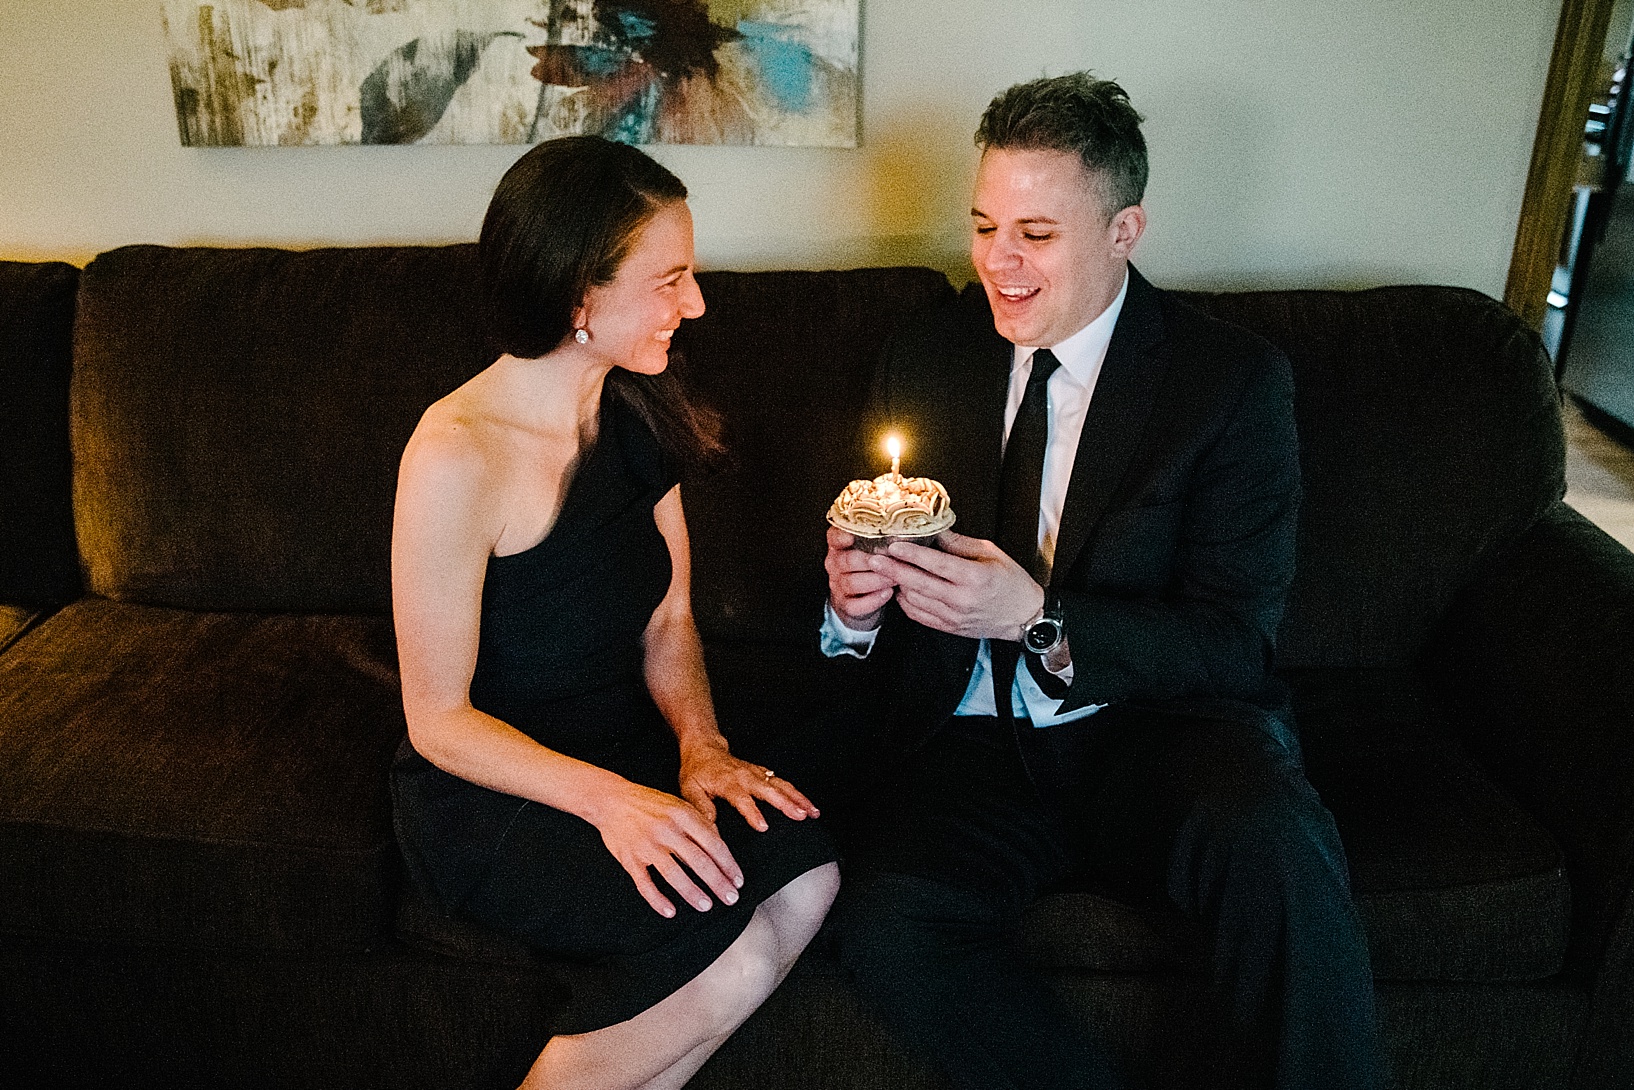 couple sitting on couch with cupcake and candle